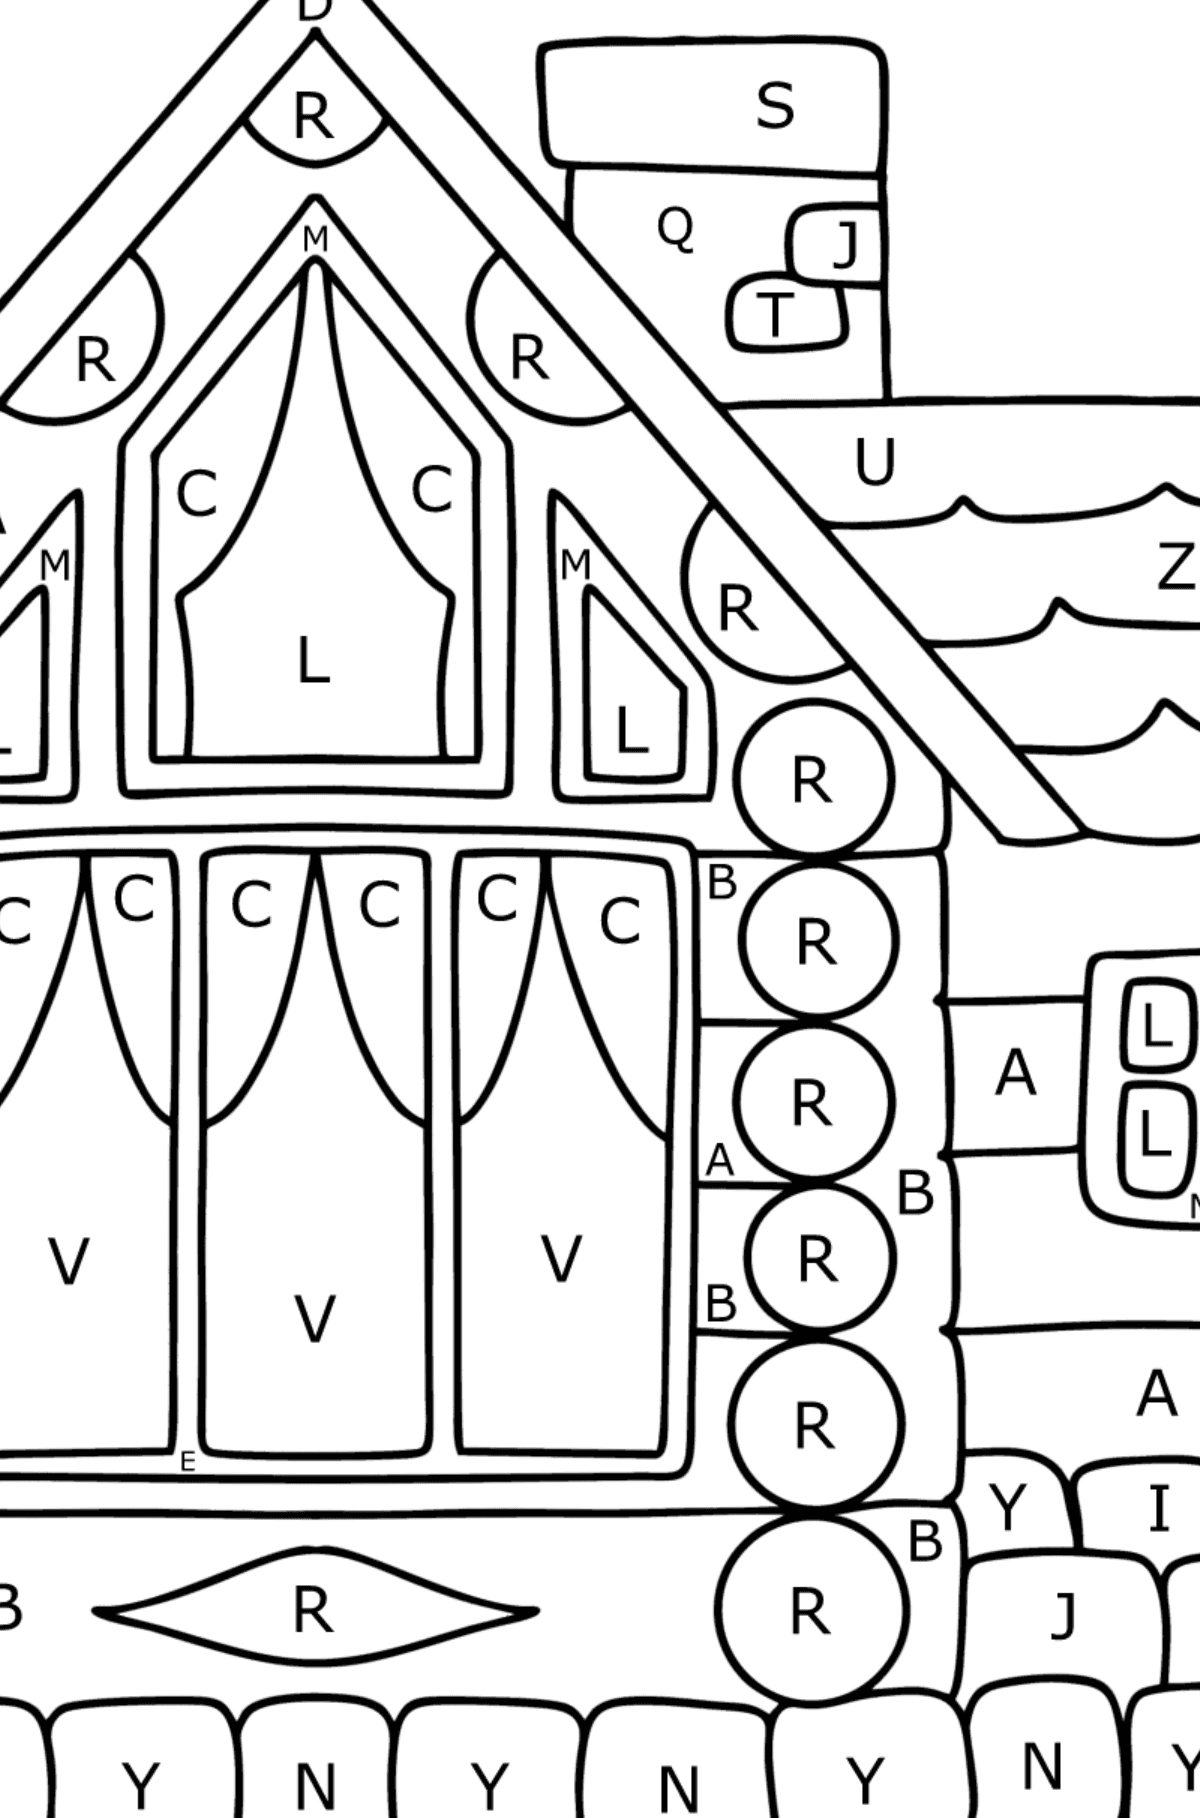 Log Cabin in Wood coloring page - Coloring by Letters for Kids